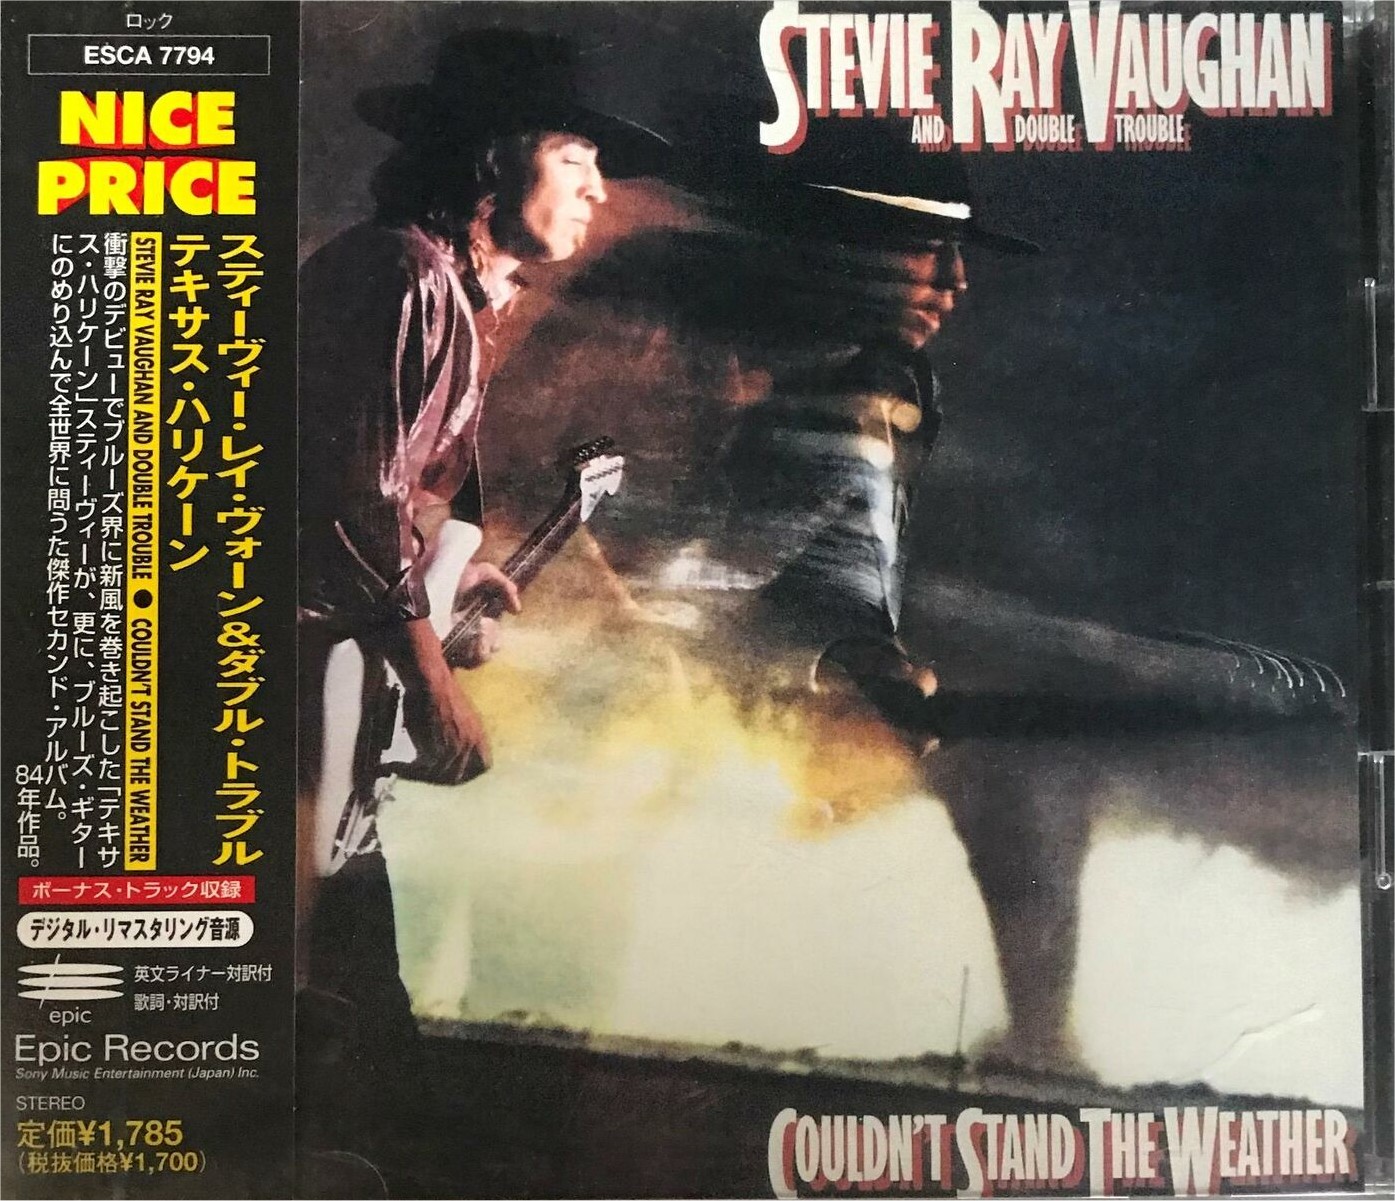 Stevie Ray Vaughan - Couldn't Stand the Weather Japanese CD